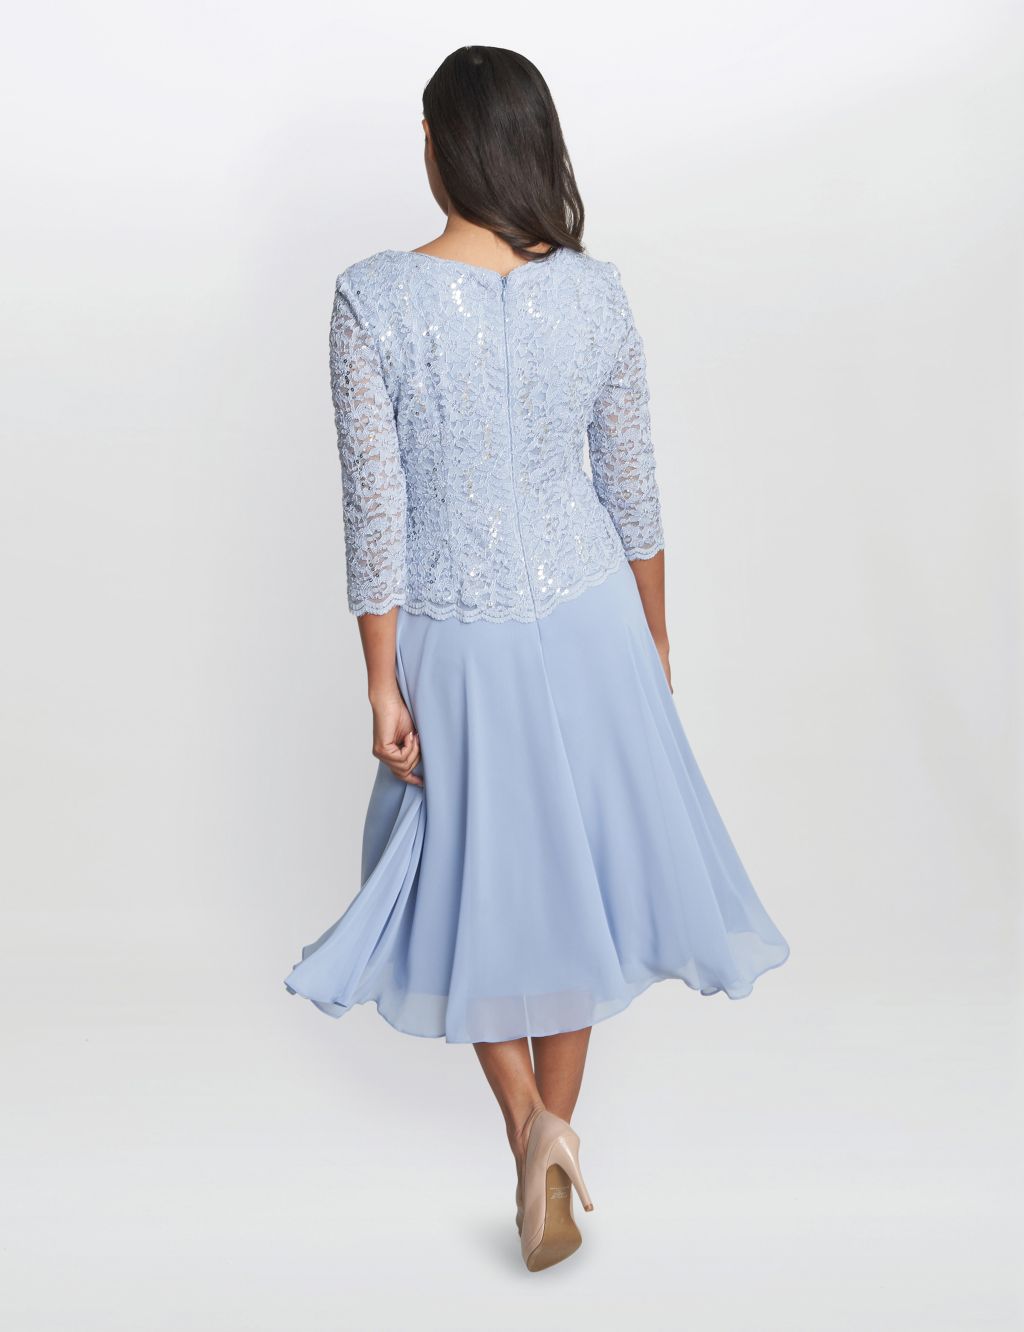 Embroidered Lace Round Neck Midi Swing Dress image 2